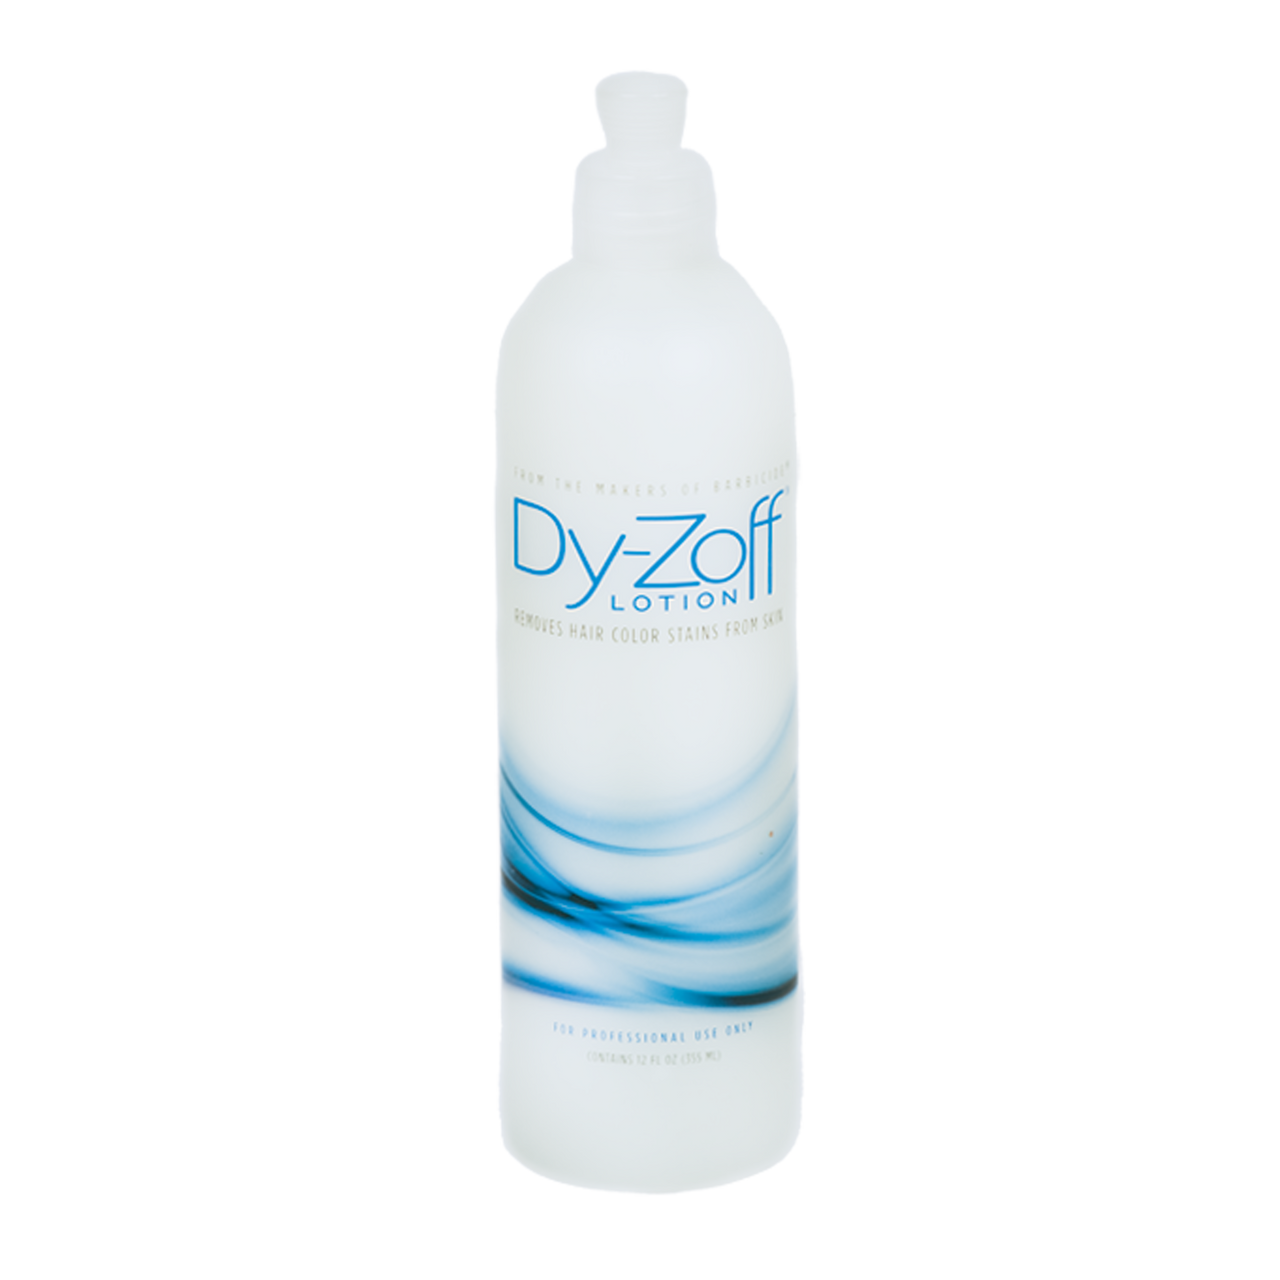 BlueCo Brands Dy-Zoff Hair Color Stain Remover Lotion 12 fl. oz.